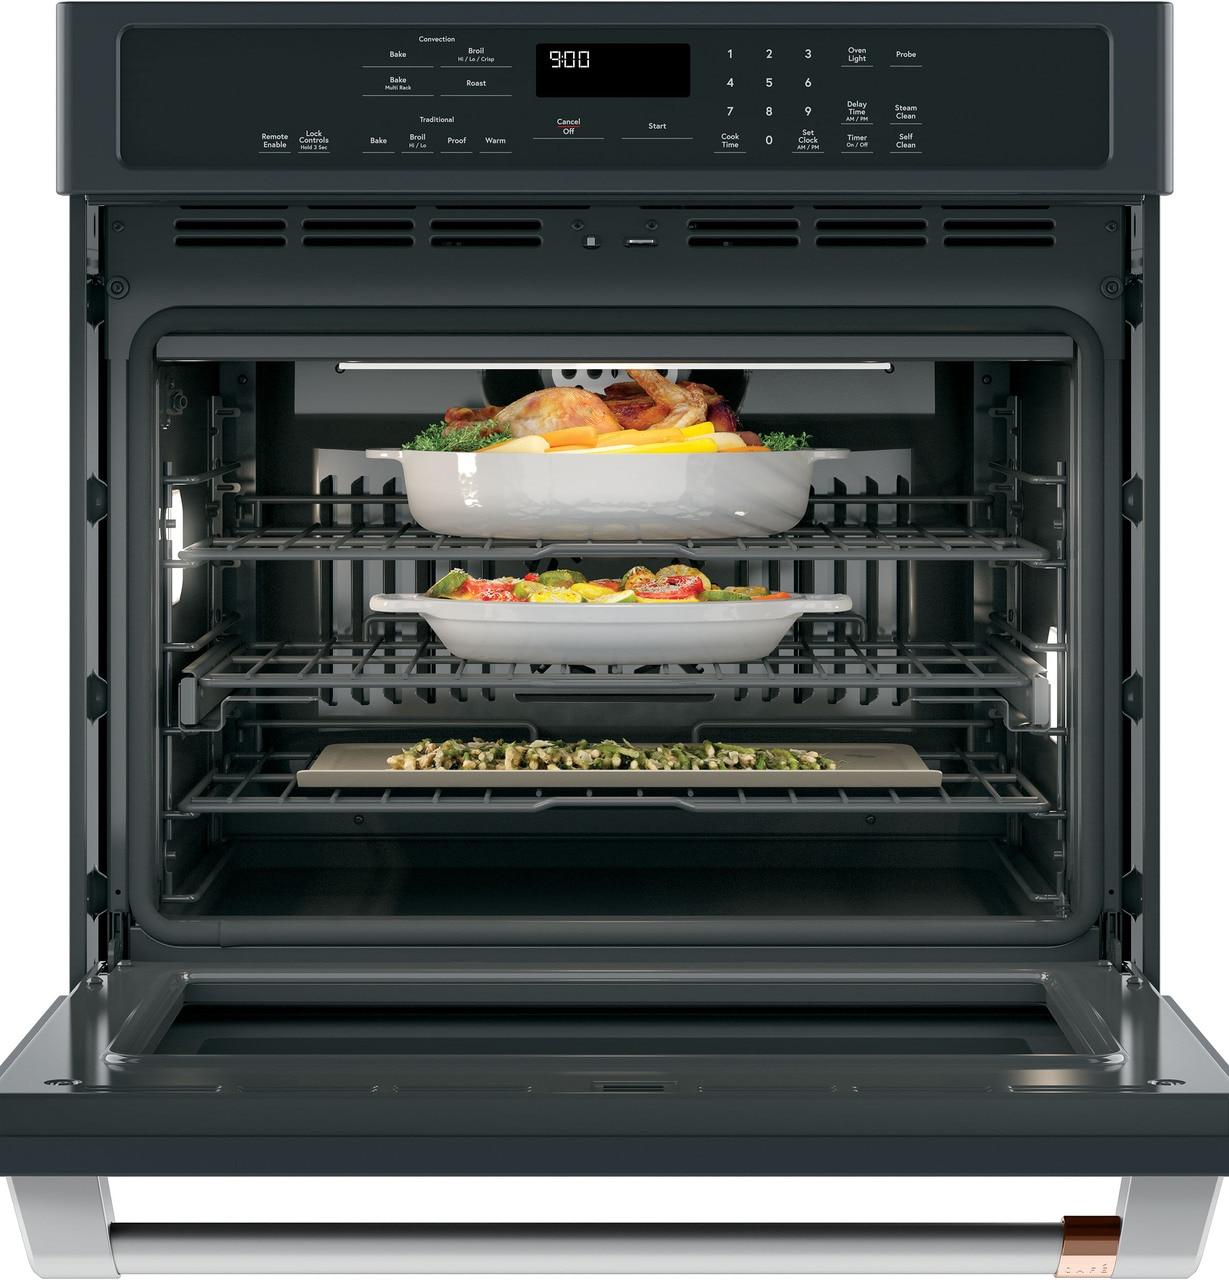 Caf(eback)™ 30" Smart Single Wall Oven with Convection